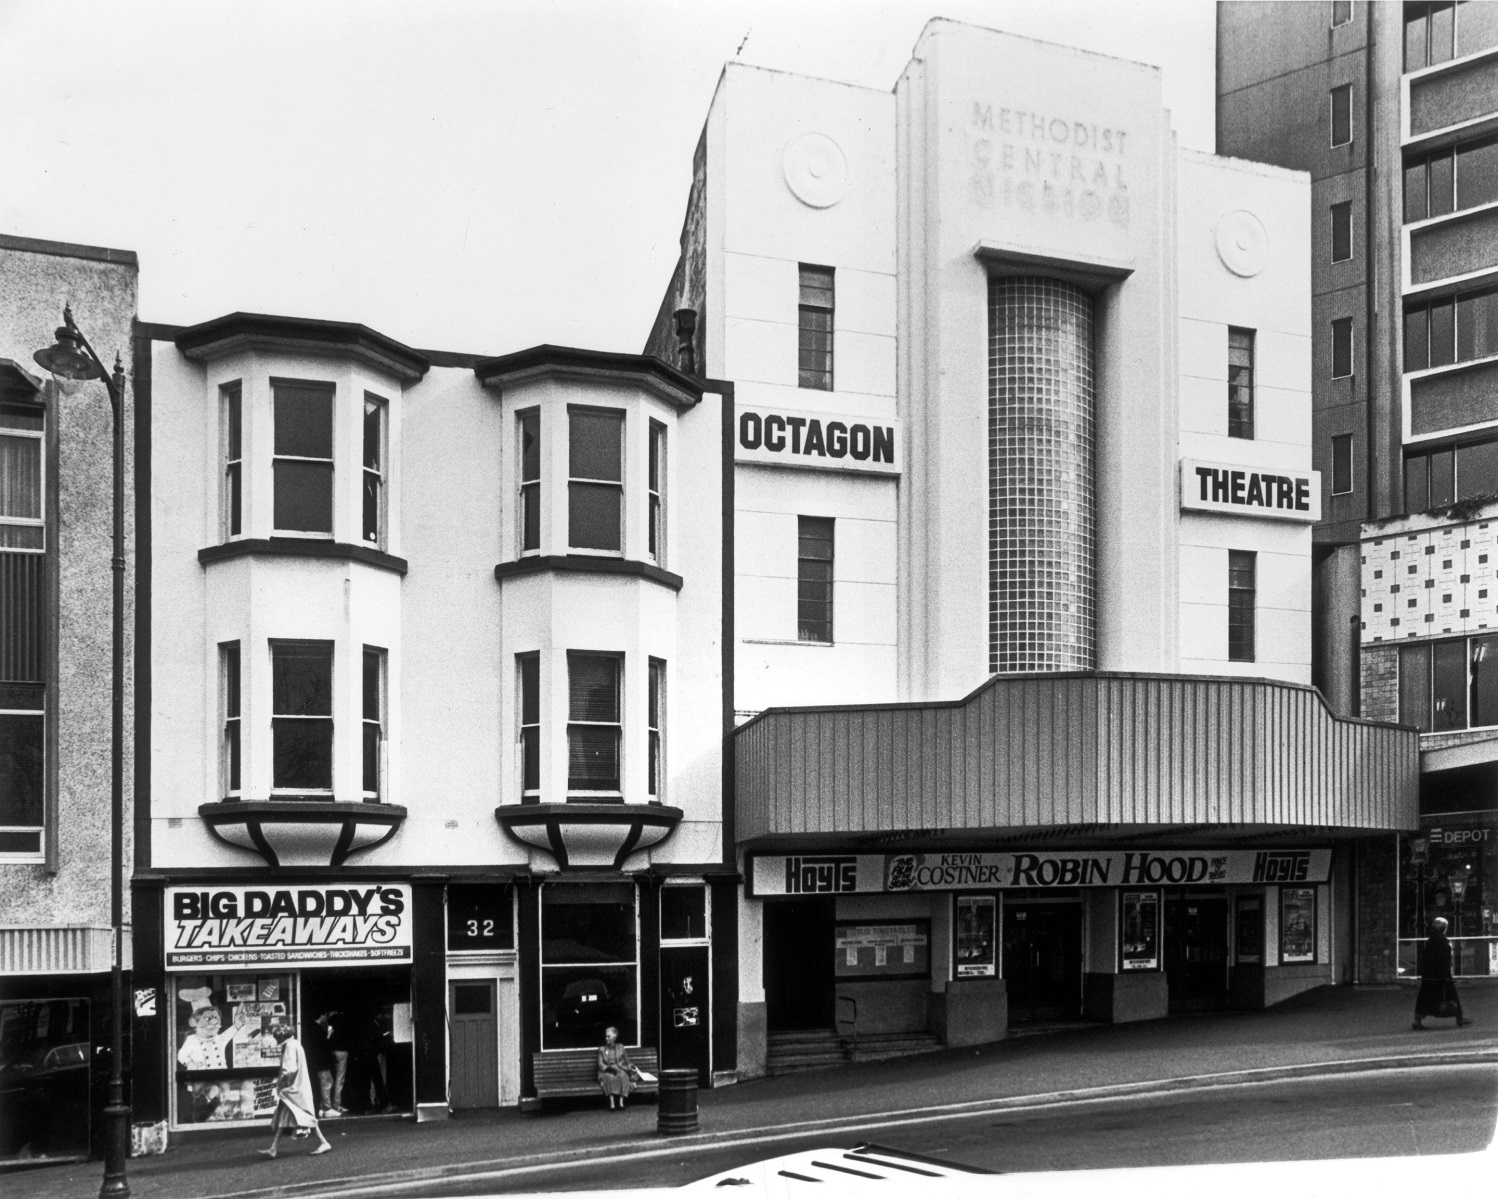 Big Daddy’s takeaways in the Octagon, Dunedin, in the 1990s. Photo: ODT files